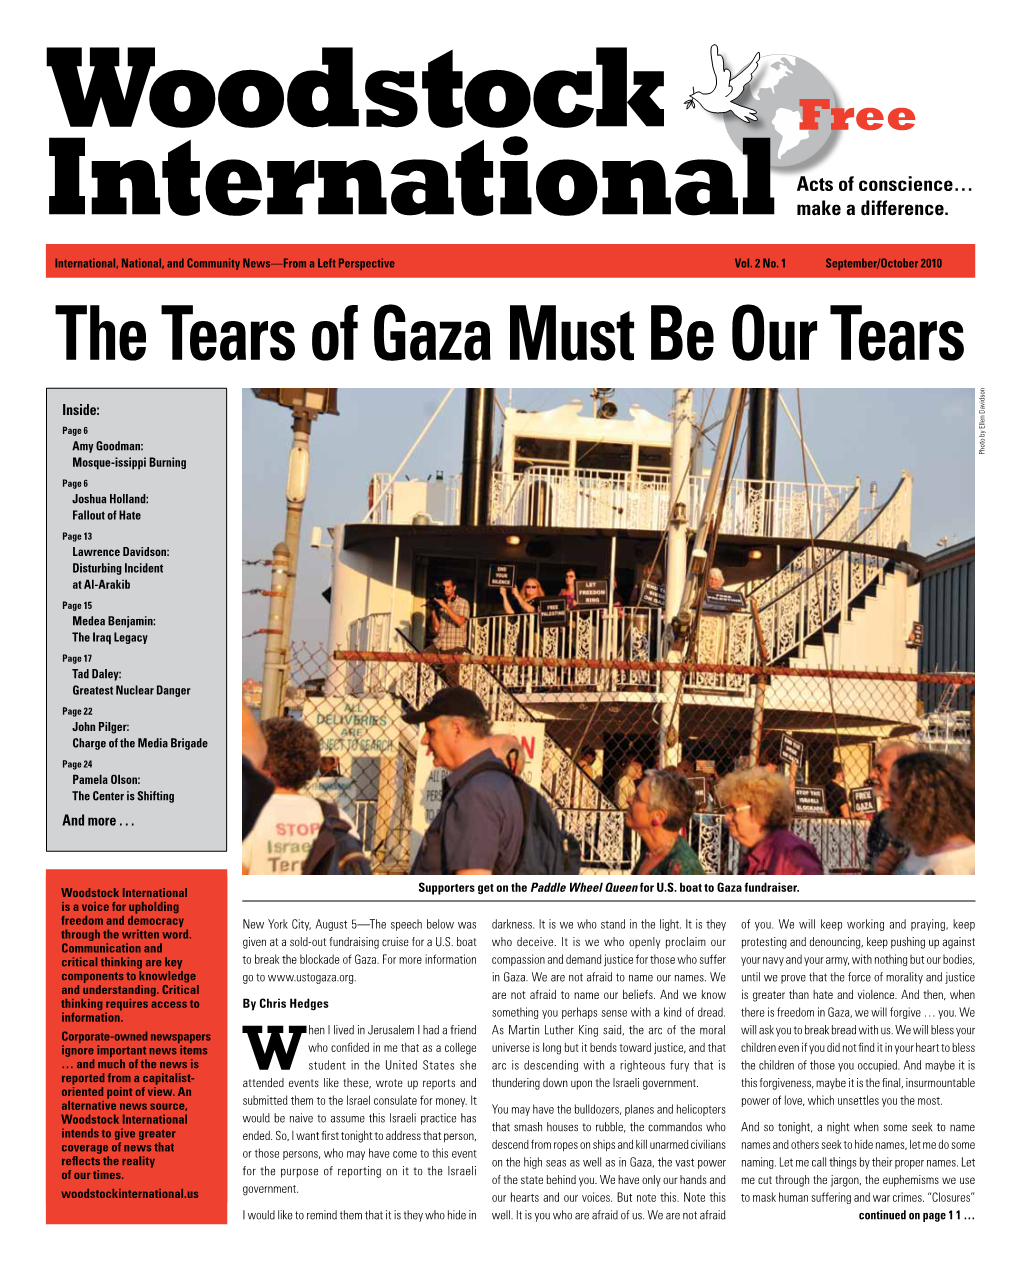 The Tears of Gaza Must Be Our Tears